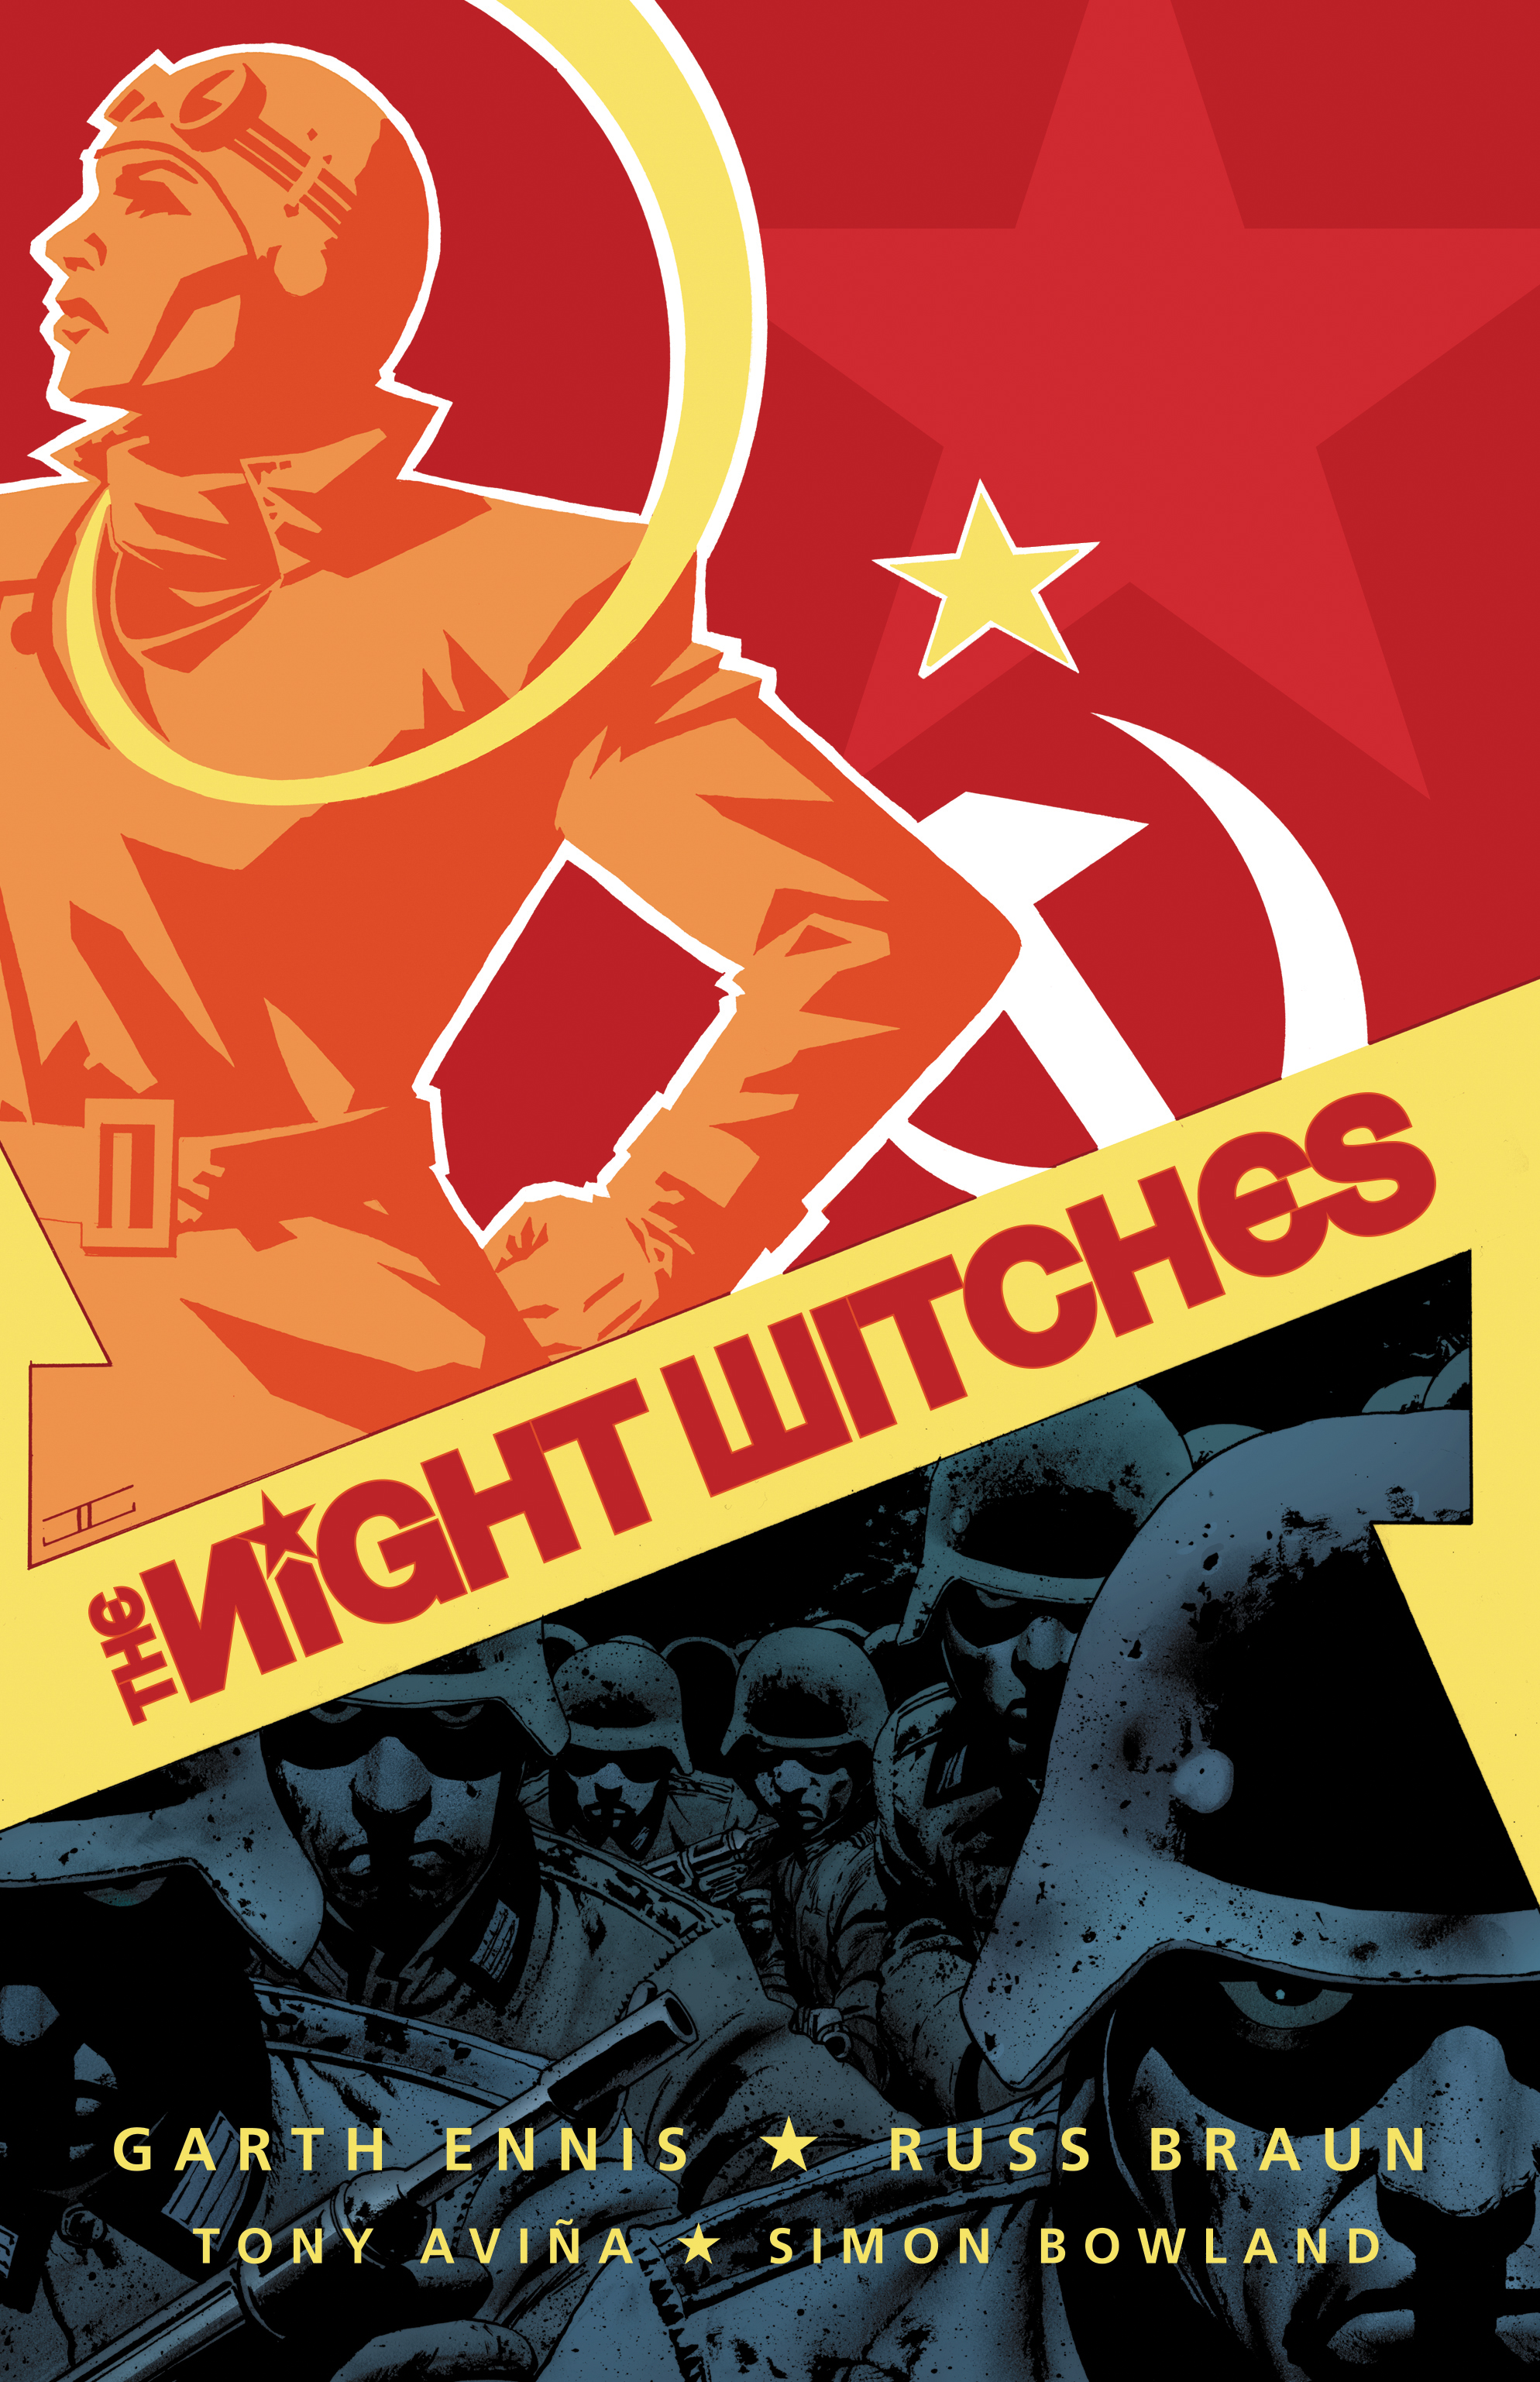 The Night Witches | U.S. Naval Institute